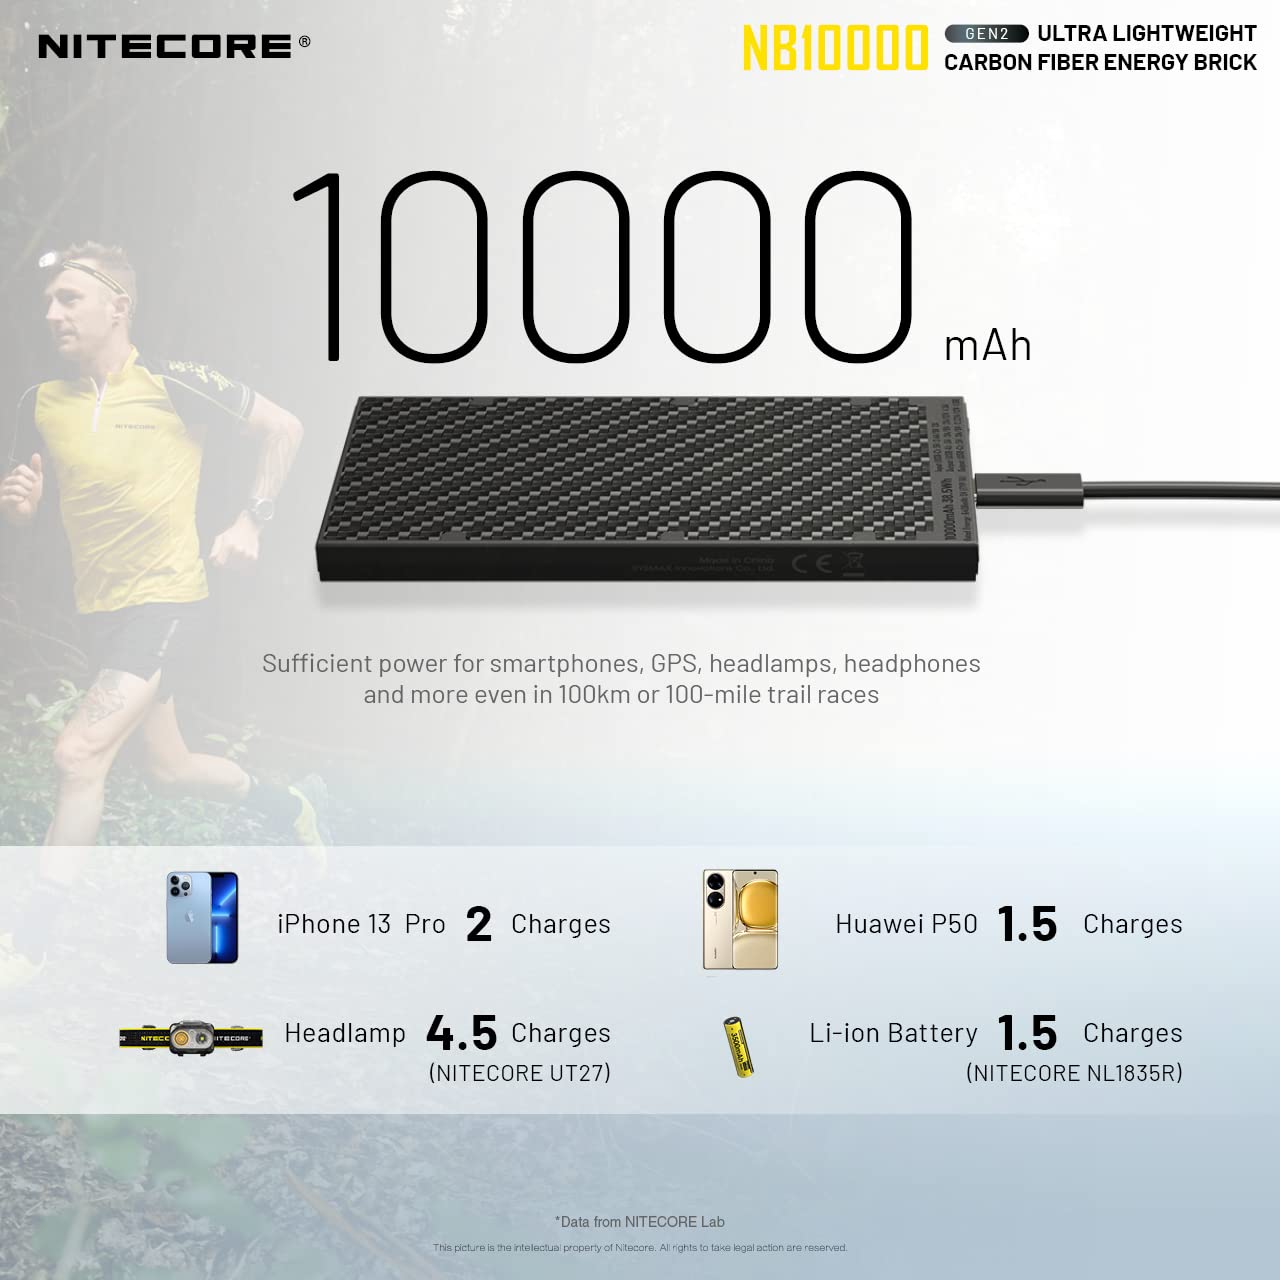 Nitecore NB10000 GEN II Ultra-Slim 10000mAh Quick-Charge Power Bank with USB and USB-C Dual Outputs and Cables for Phones, Headlamps LifeMods Bundled with a Mini Multi-Tool Keychain COB Flashlight